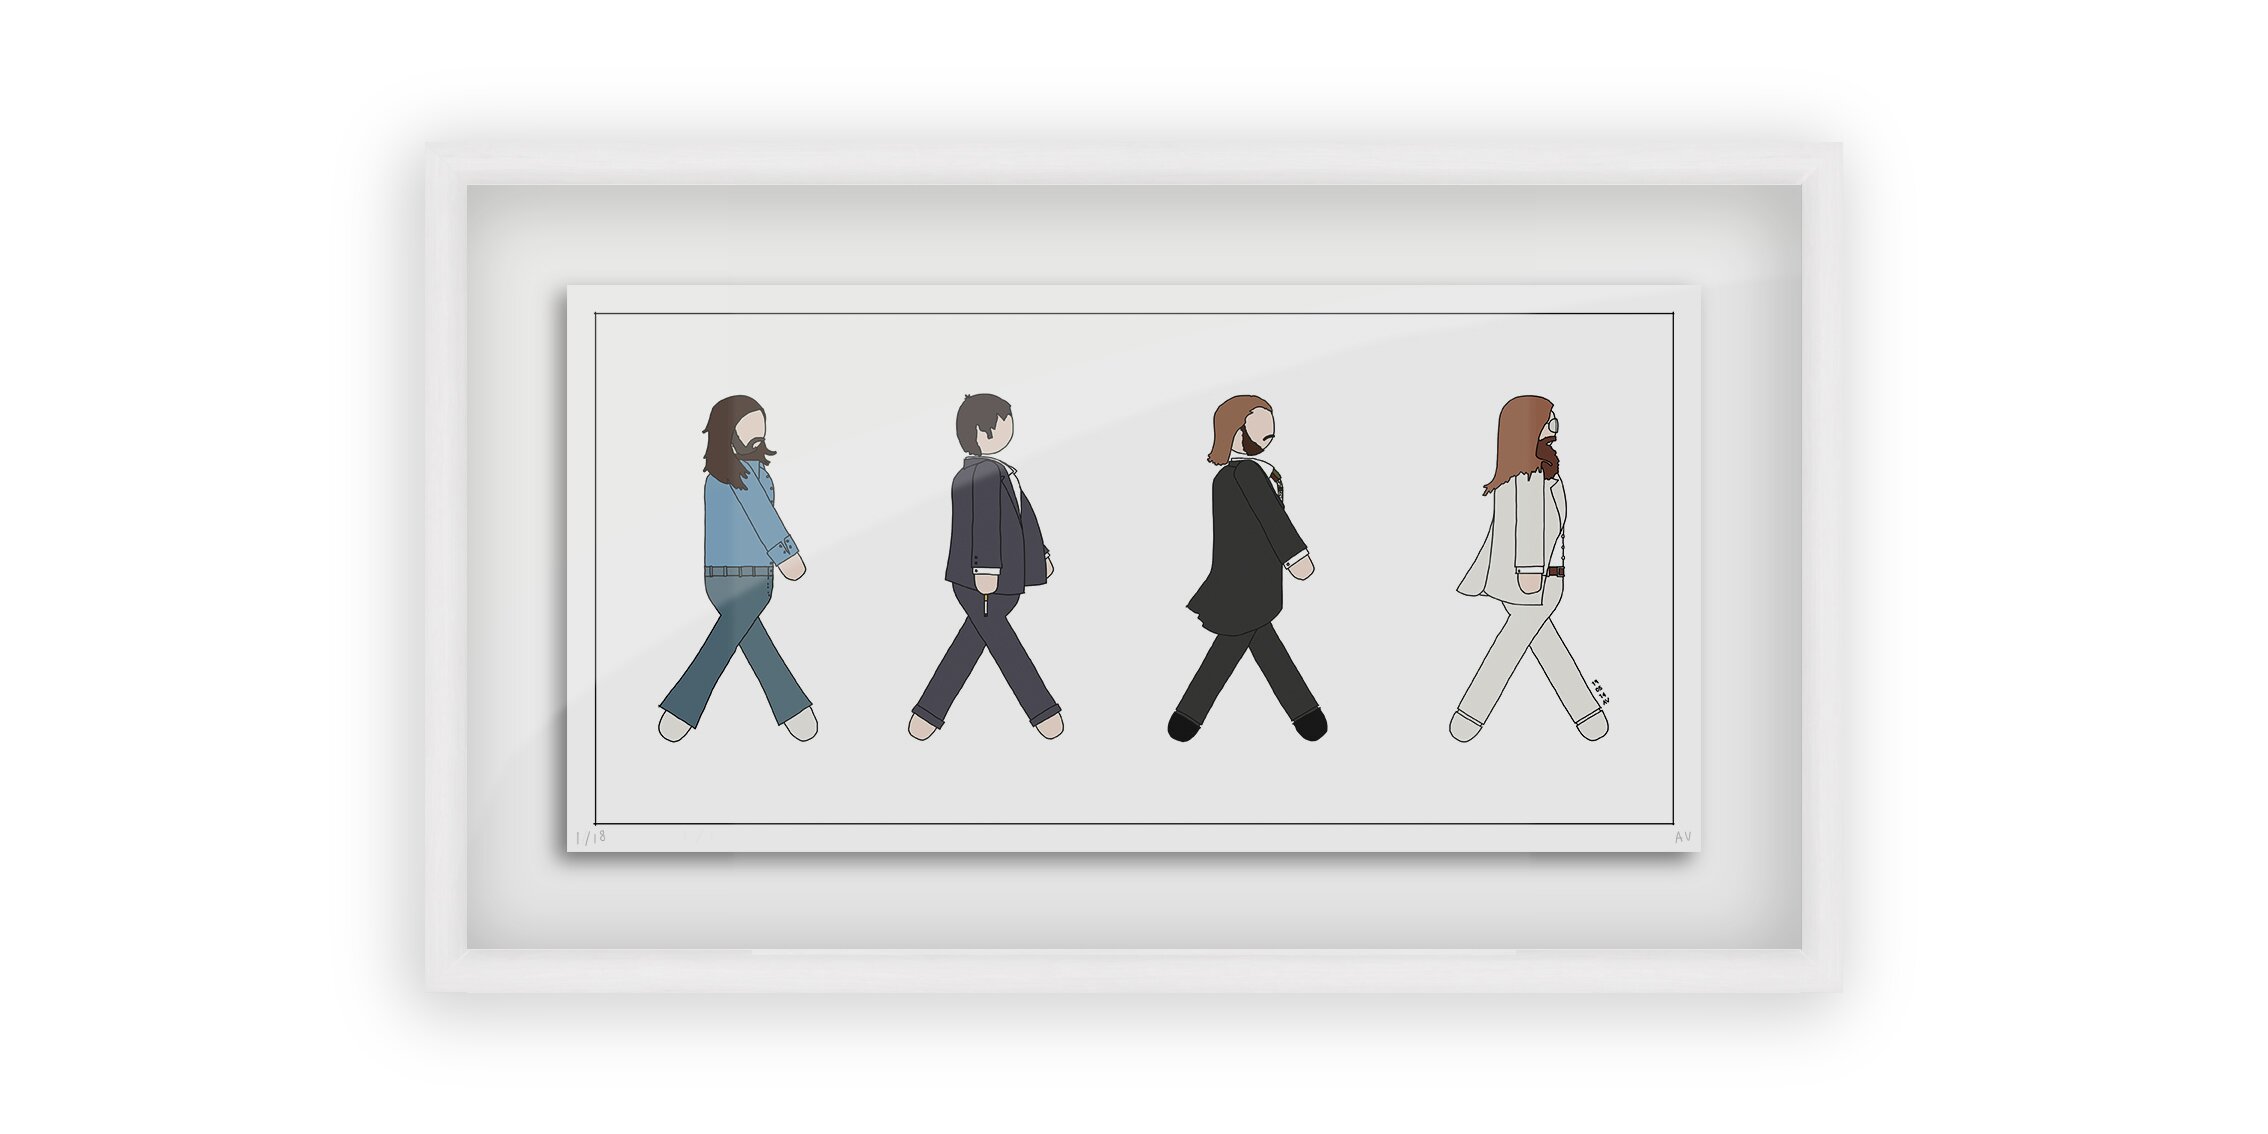 Beatles Abbey Road - Persona Art Project (Ant Vervoort Hand Drawing)